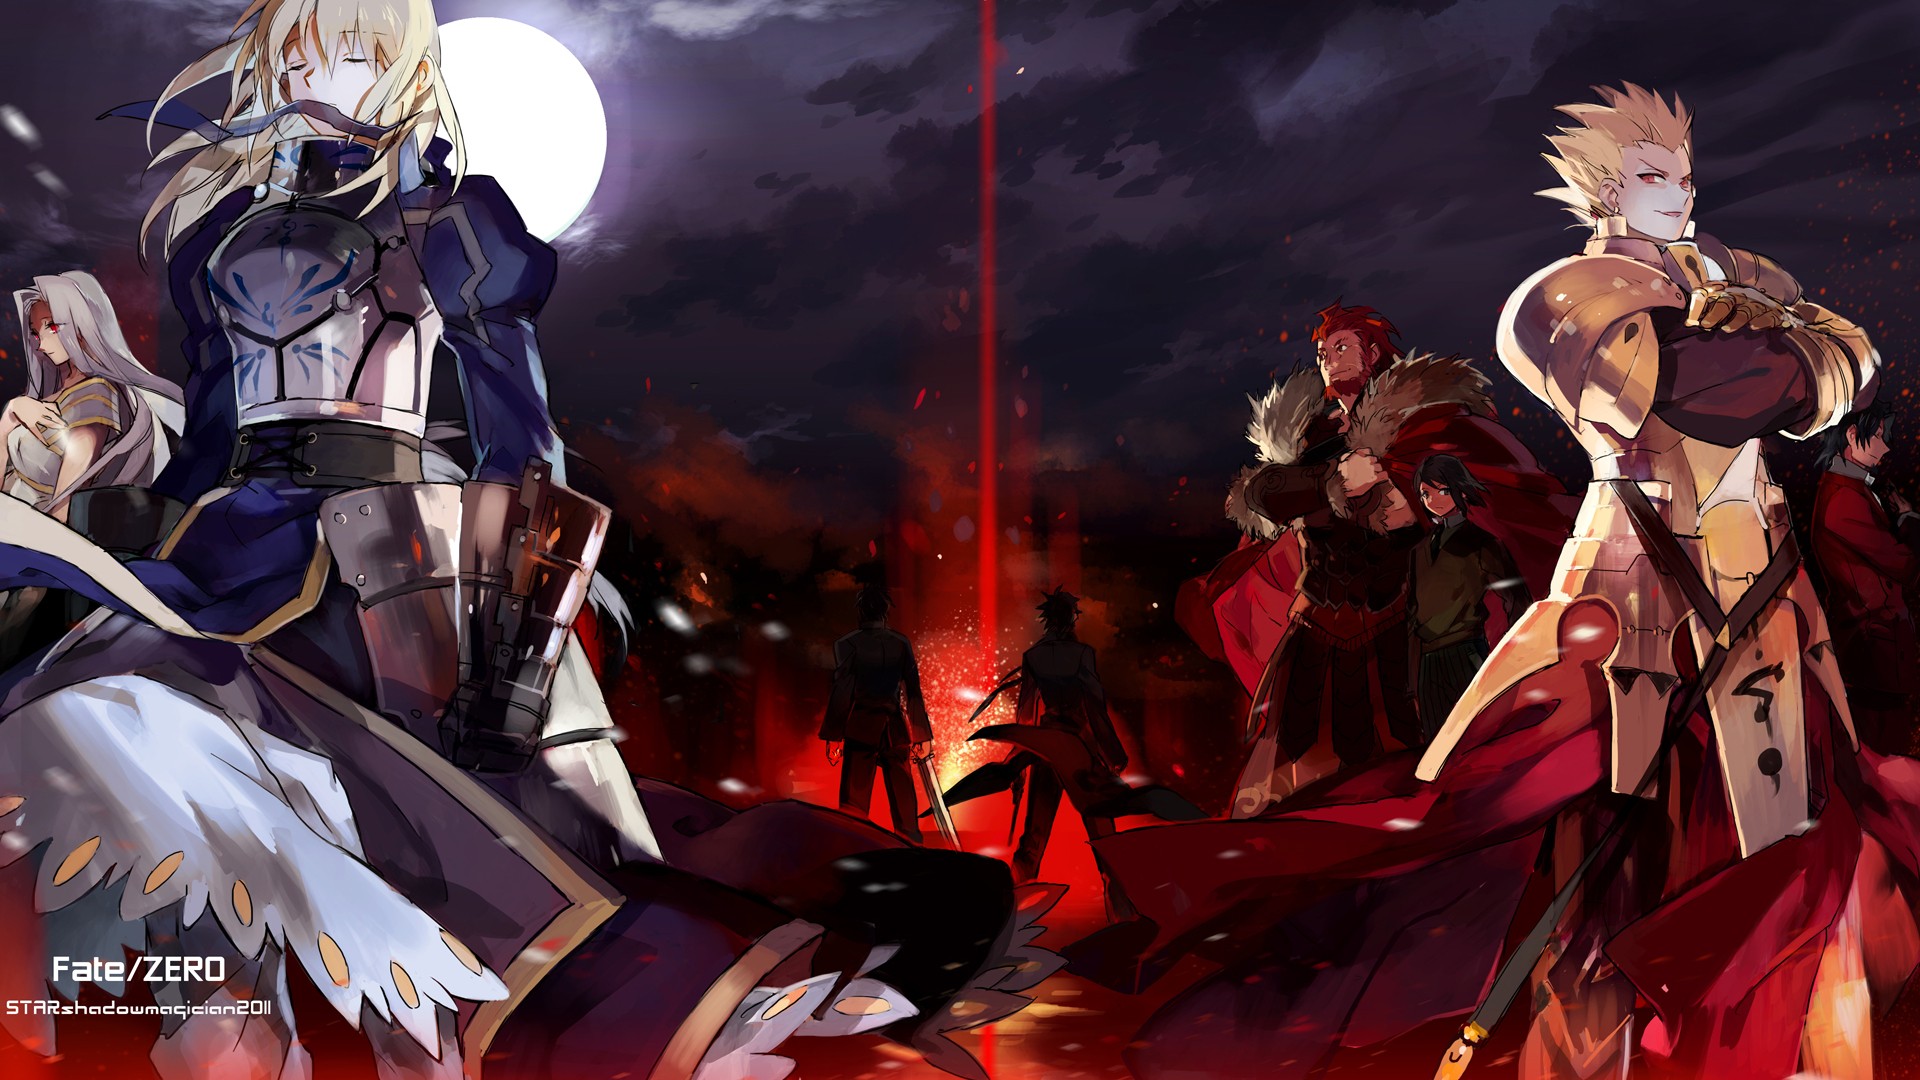  images Fate Stay Night HD wallpaper and background photos 32290756 1920x1080